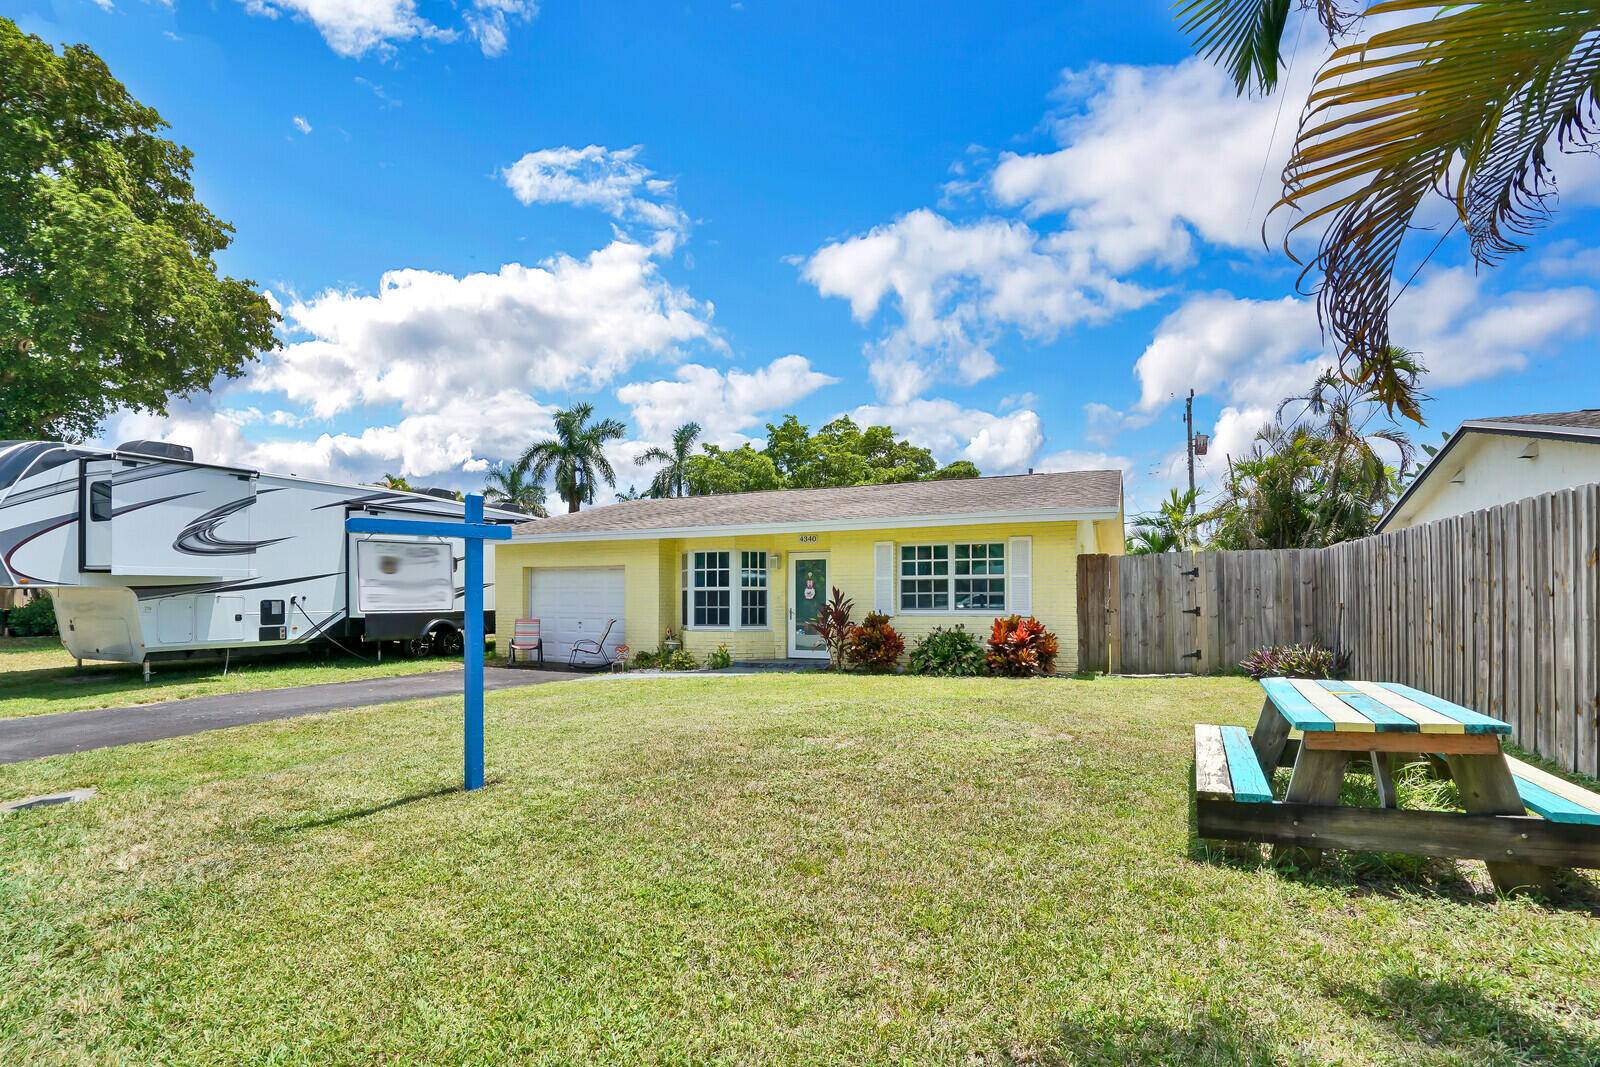 A beautiful and well maintained 3 bedroom 2 bathroom home with a bonus family room, newer kitchen and flooring in the living area, hurricane Impact windows throughout, fully fenced yard, ...